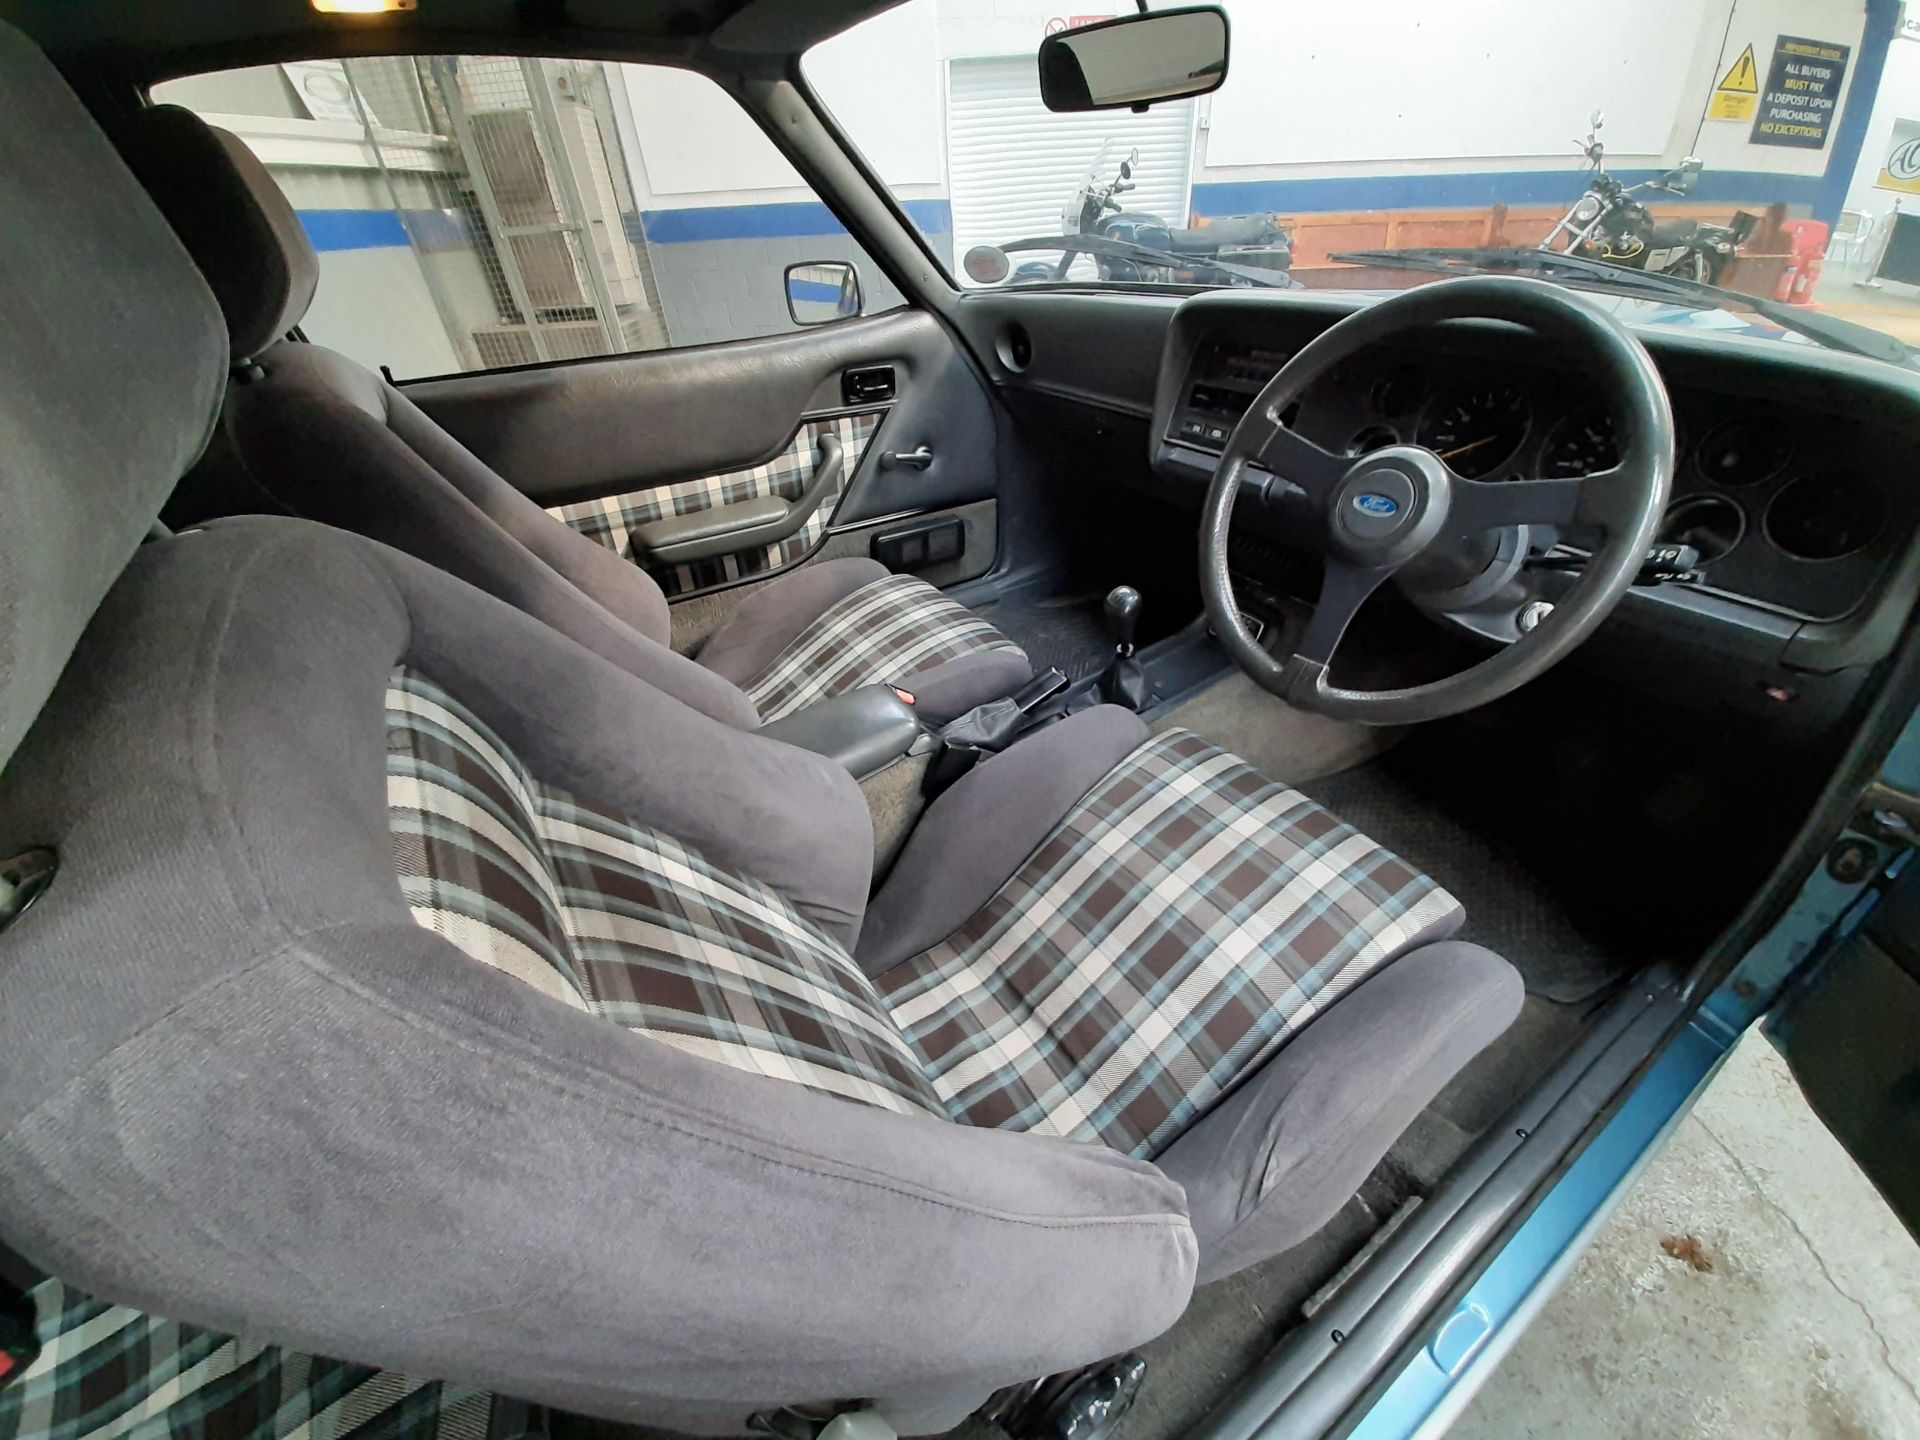 1982 Ford Capri 2.8 Injection - Image 11 of 23